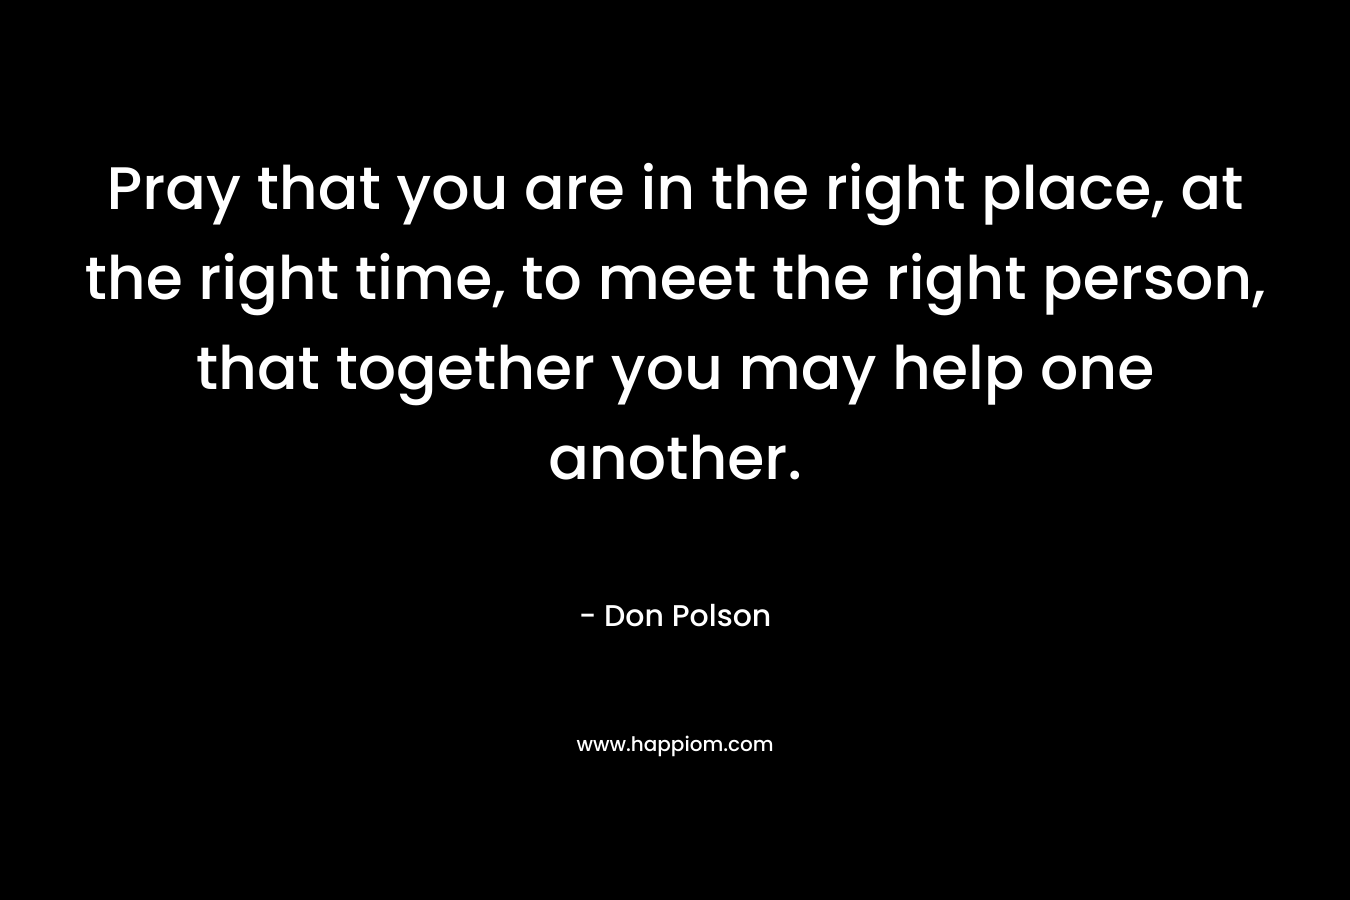 Pray that you are in the right place, at the right time, to meet the right person, that together you may help one another.